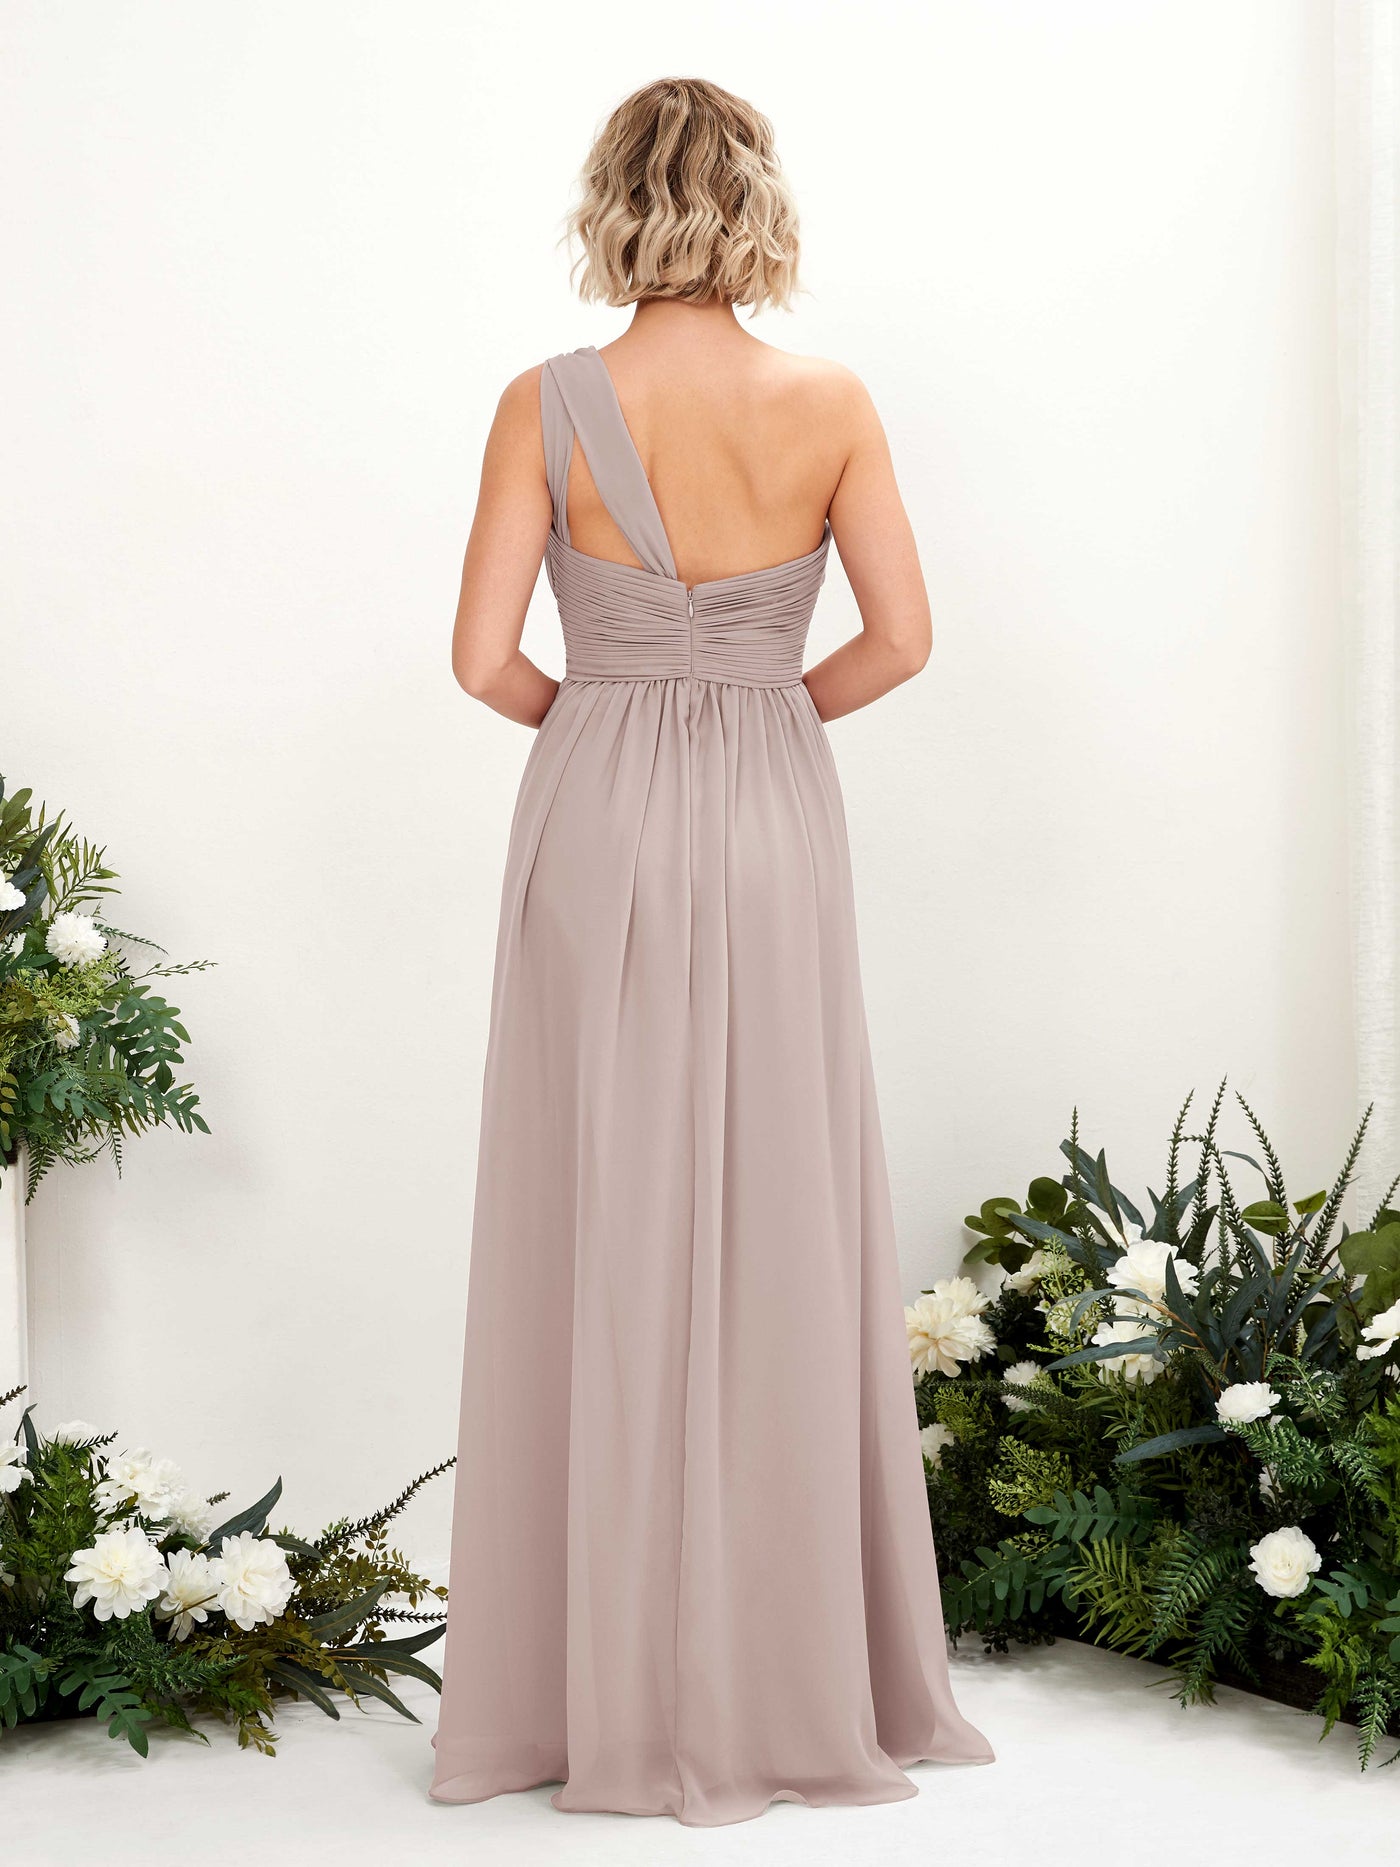 Taupe Bridesmaid Dresses Bridesmaid Dress Ball Gown Chiffon One Shoulder Full Length Sleeveless Wedding Party Dress (81225024)#color_taupe